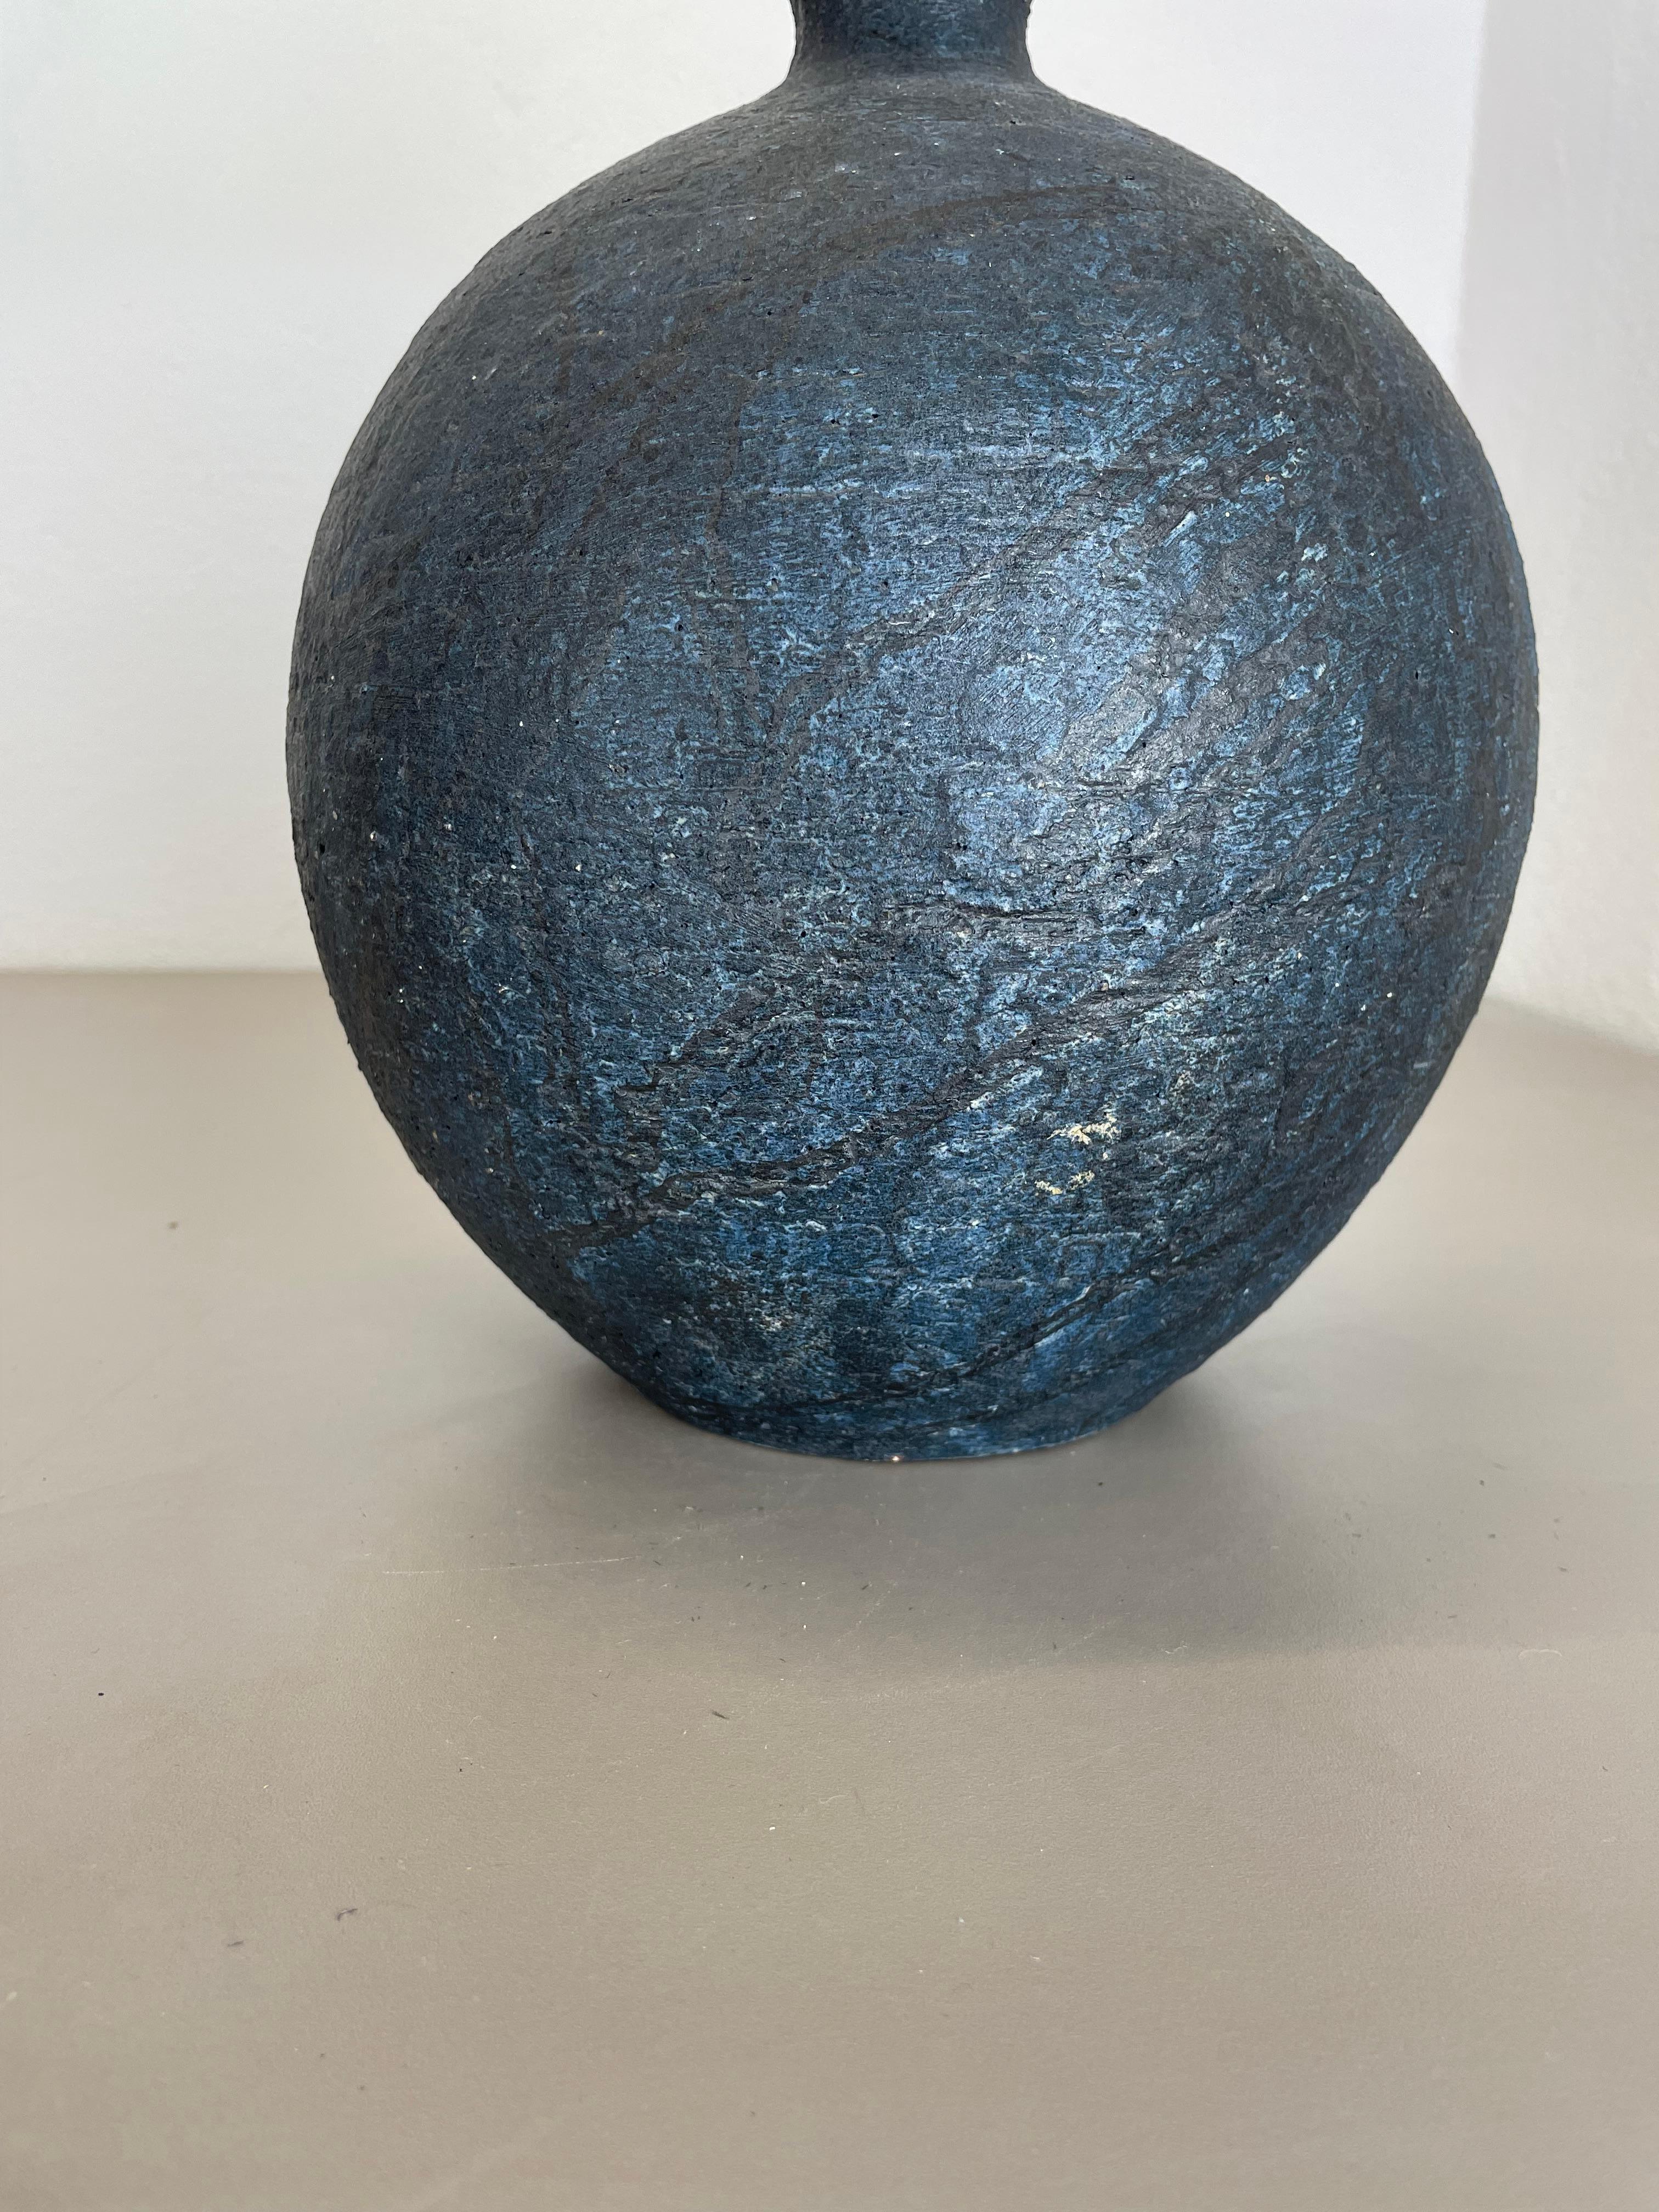 Abstract 31cm Ceramic Studio Pottery Object, Gerhard Liebenthron, Germany, 1981 For Sale 8